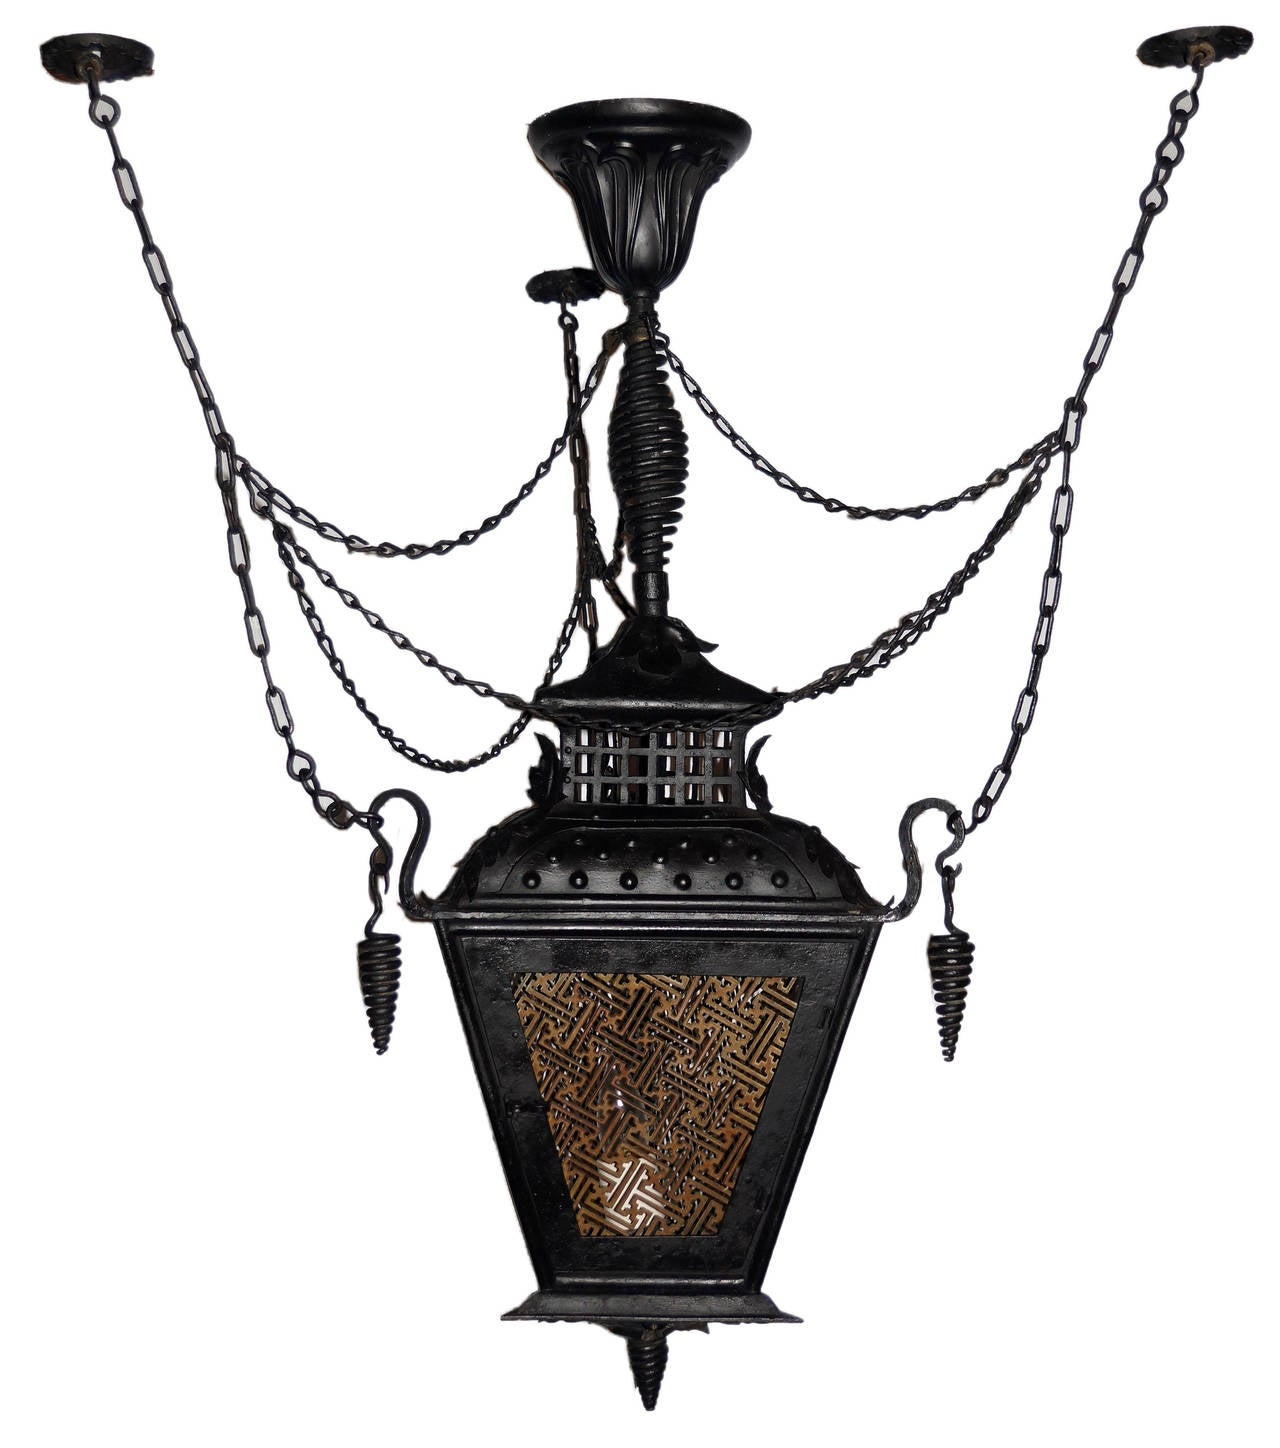 Chinoiserie inspired exquisitely created trapezoidal shaped lantern, circa 1905. An interesting combination of fine artisanship using forged steel and wrought iron intertwined together. From a Bronx, NY mansion.